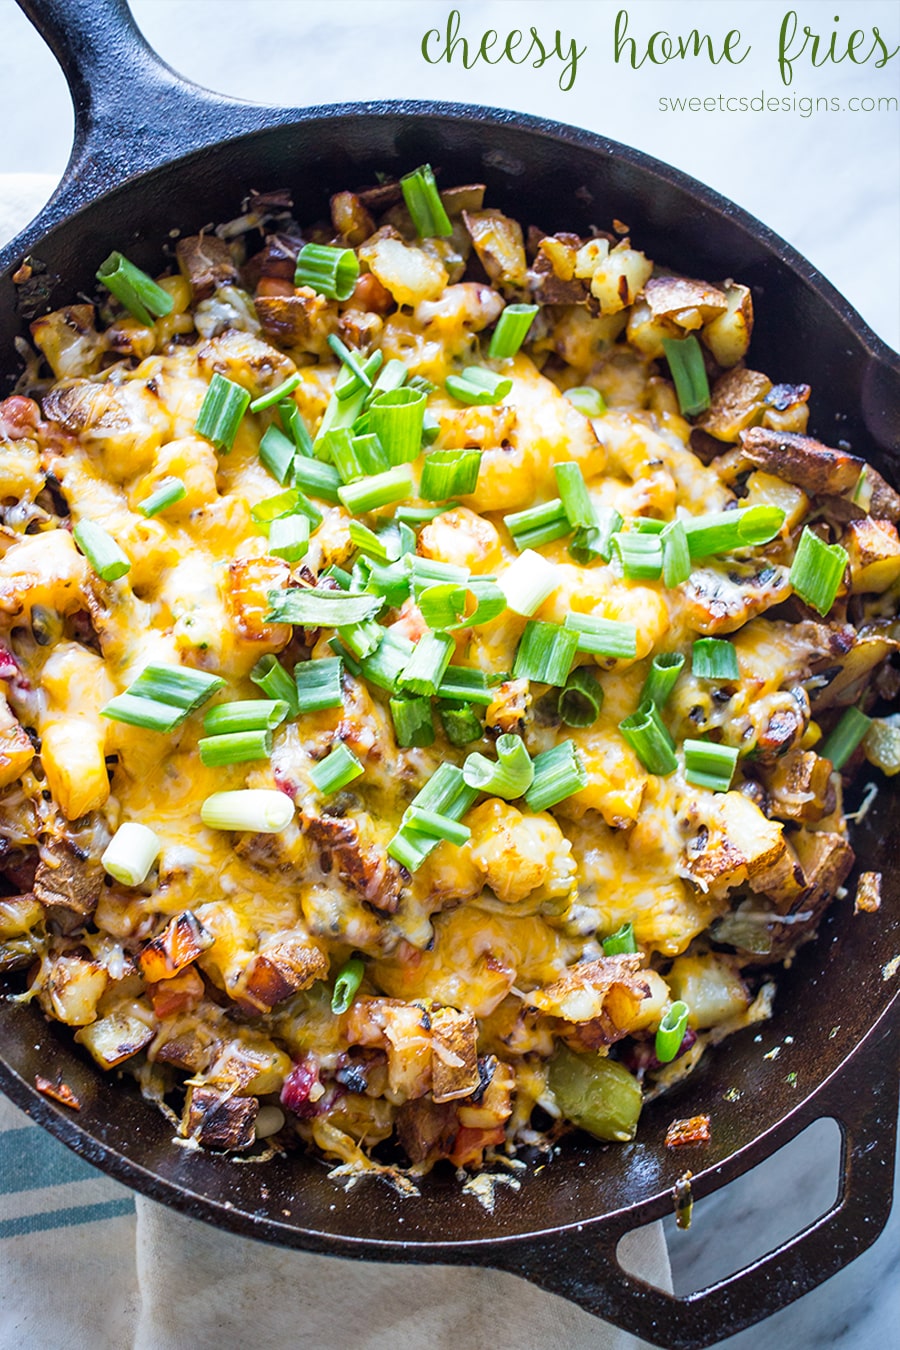 potatoes, zucchini, cheese, and green onions in a cast iron skillet